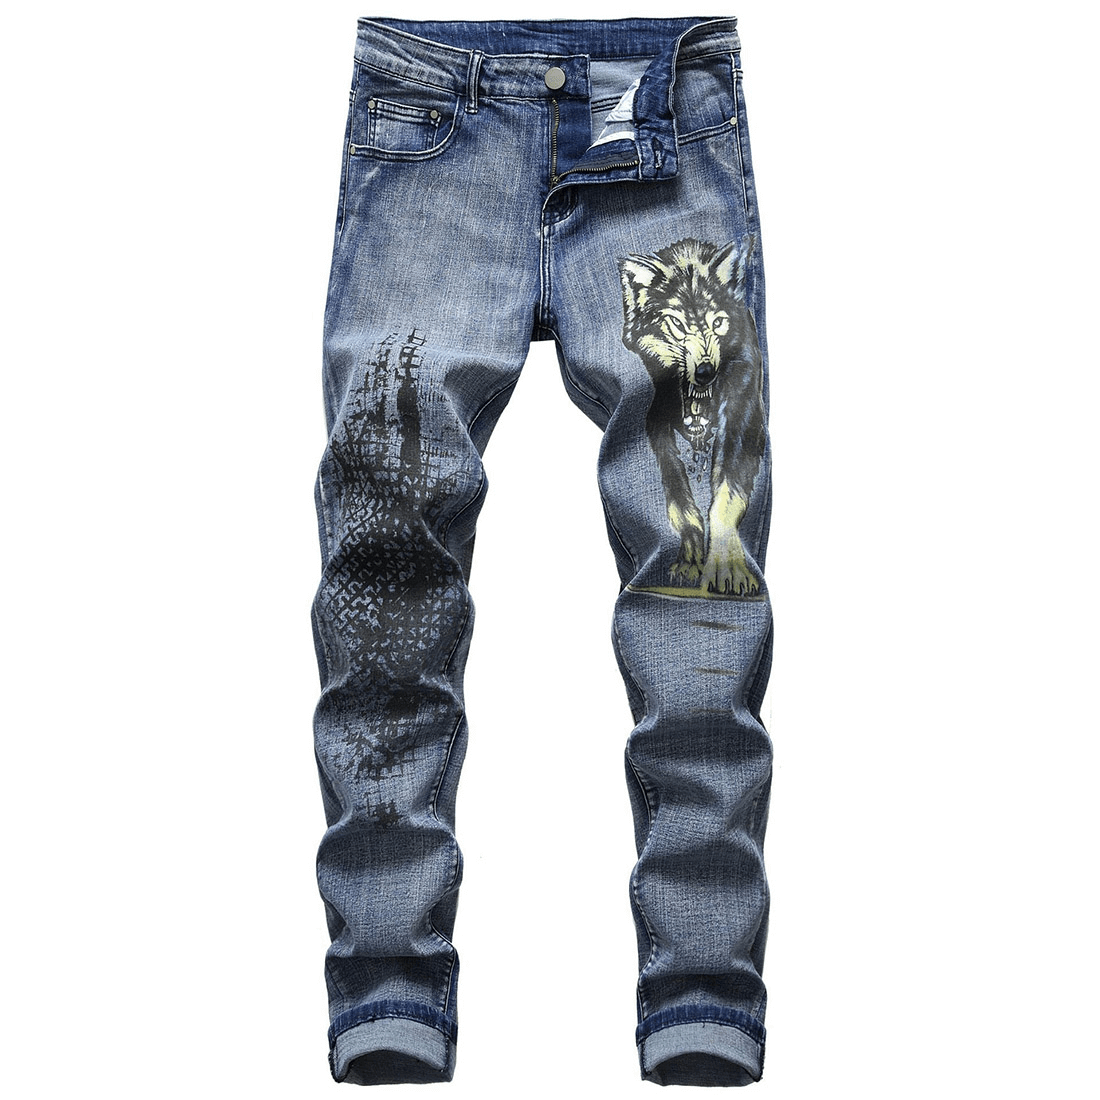 Stylish Wolf Print Straight Jeans / Casual Zipper Blue Denim Pants for Men / Fashion Male Clothing